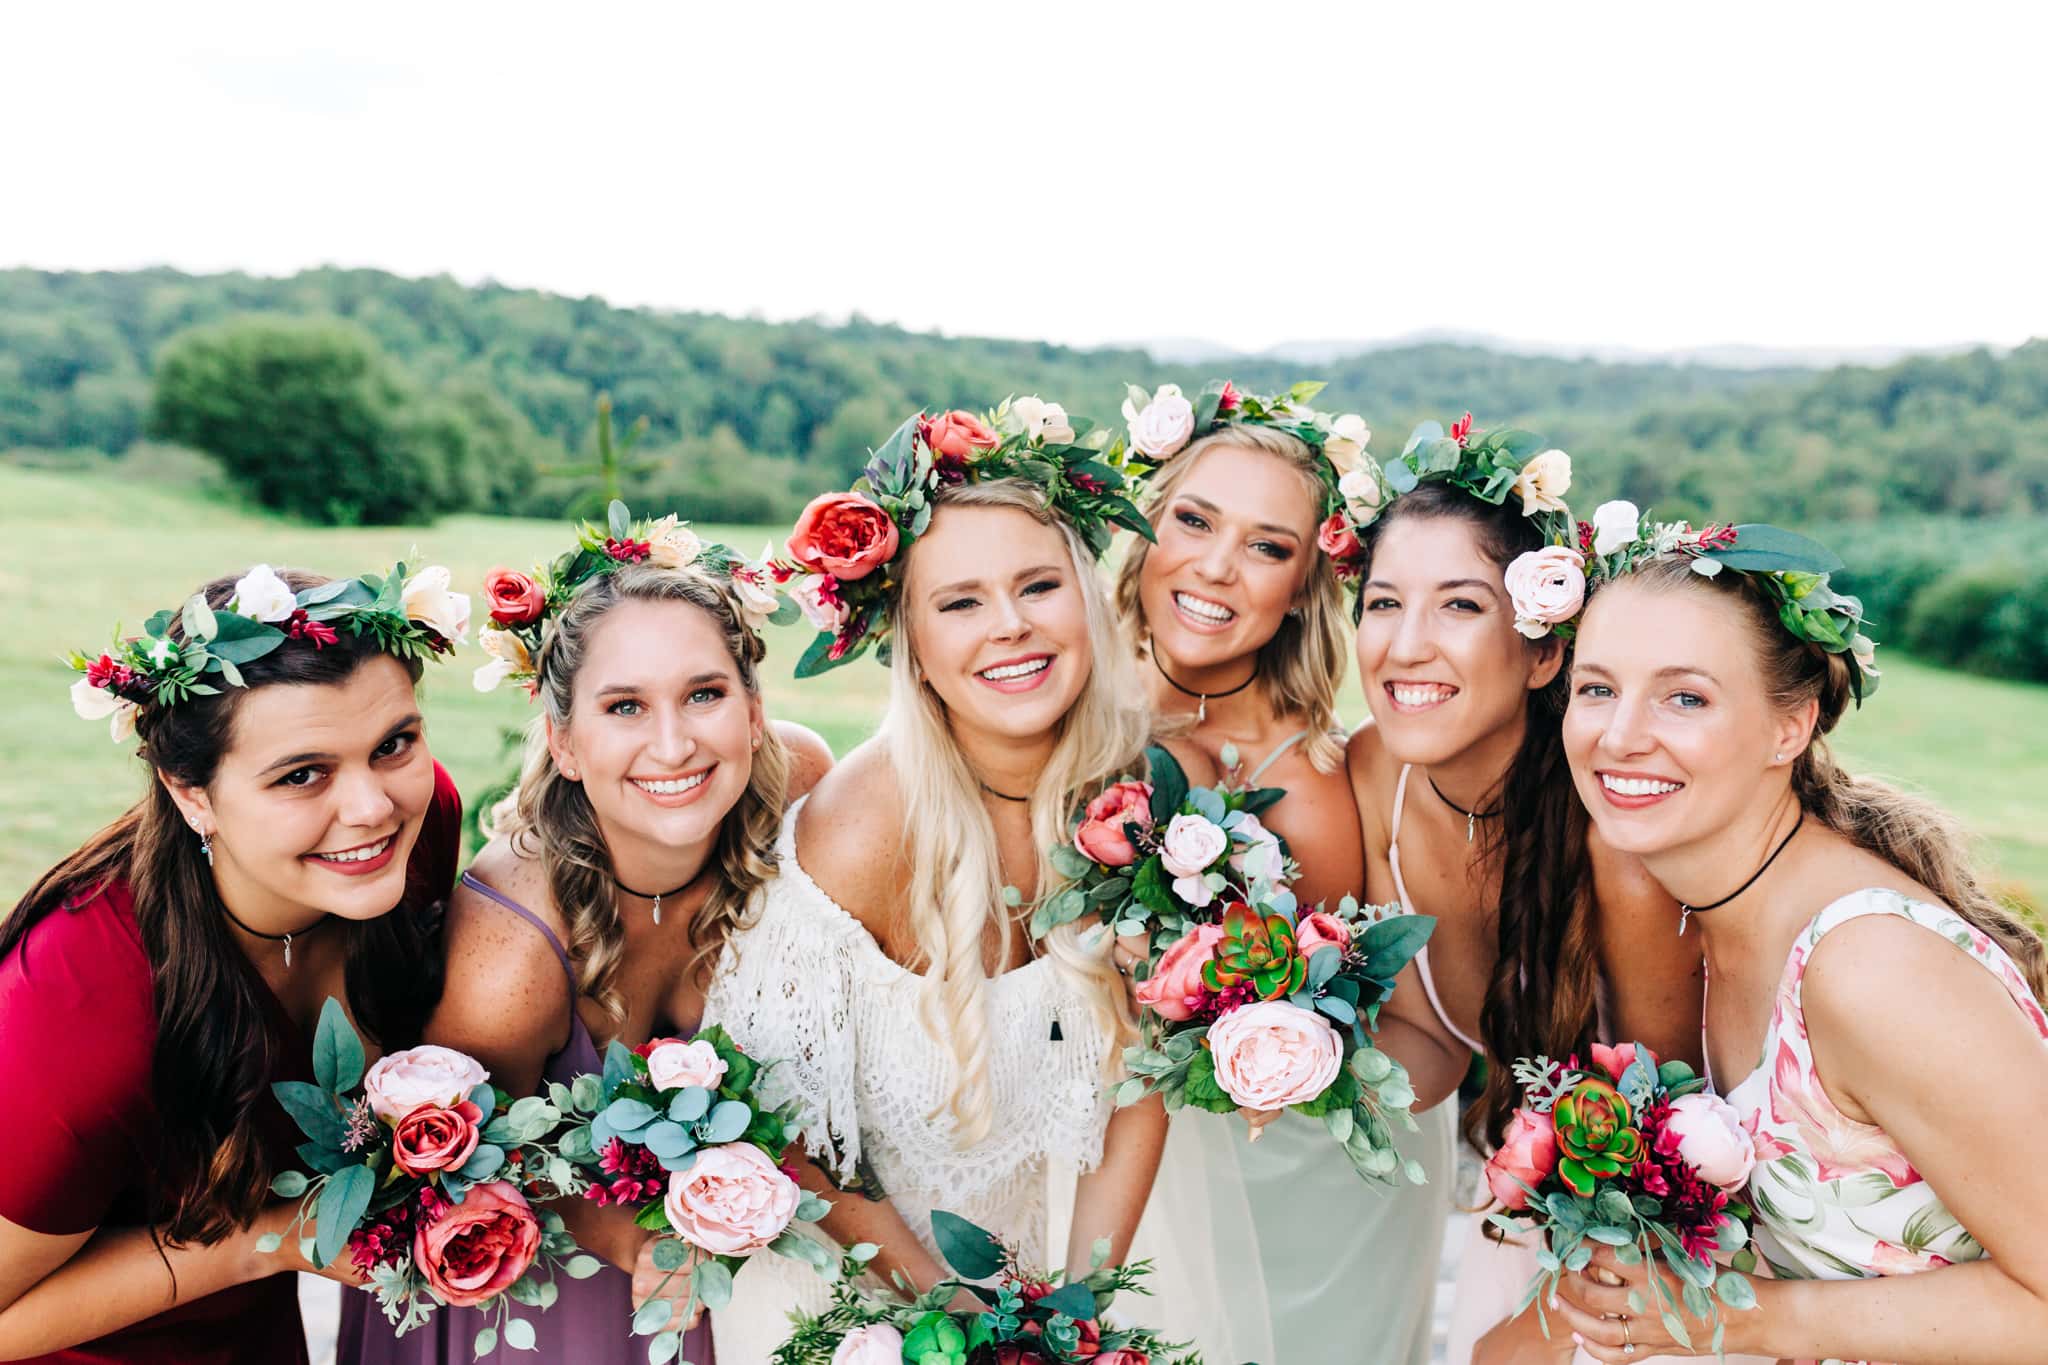 bride and bridesmaids with red white and green boho floral crowns and lace dresses